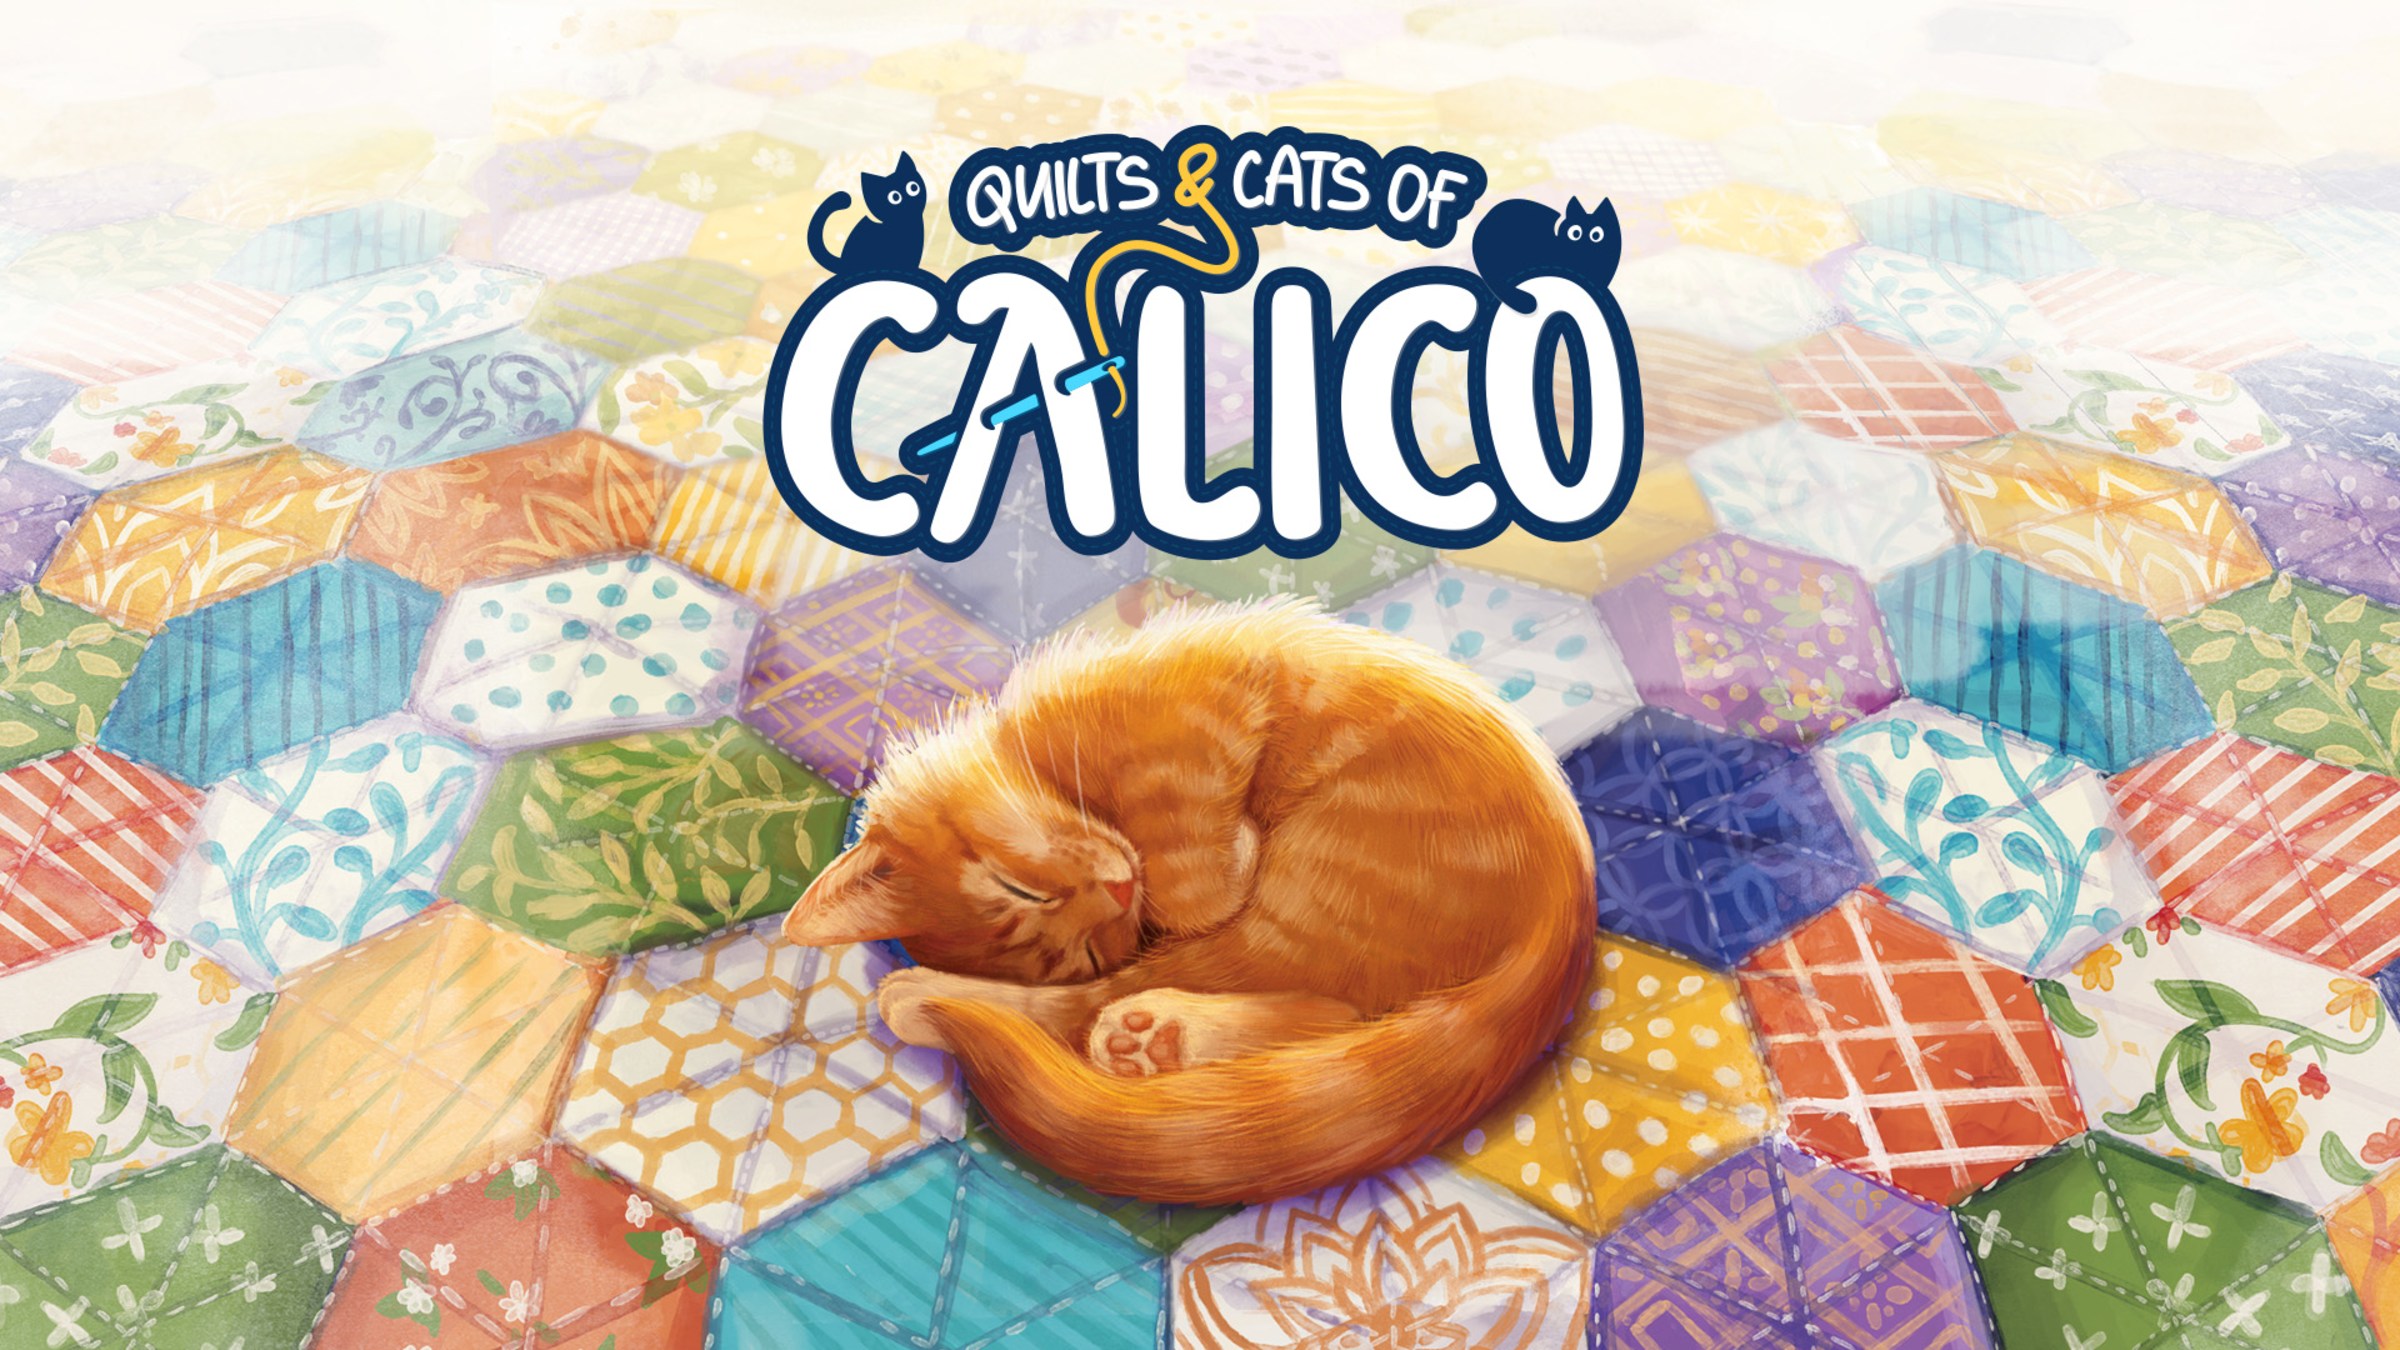 Quilts and Cats of Calico PC Early Access Version Full Game Setup Free Download